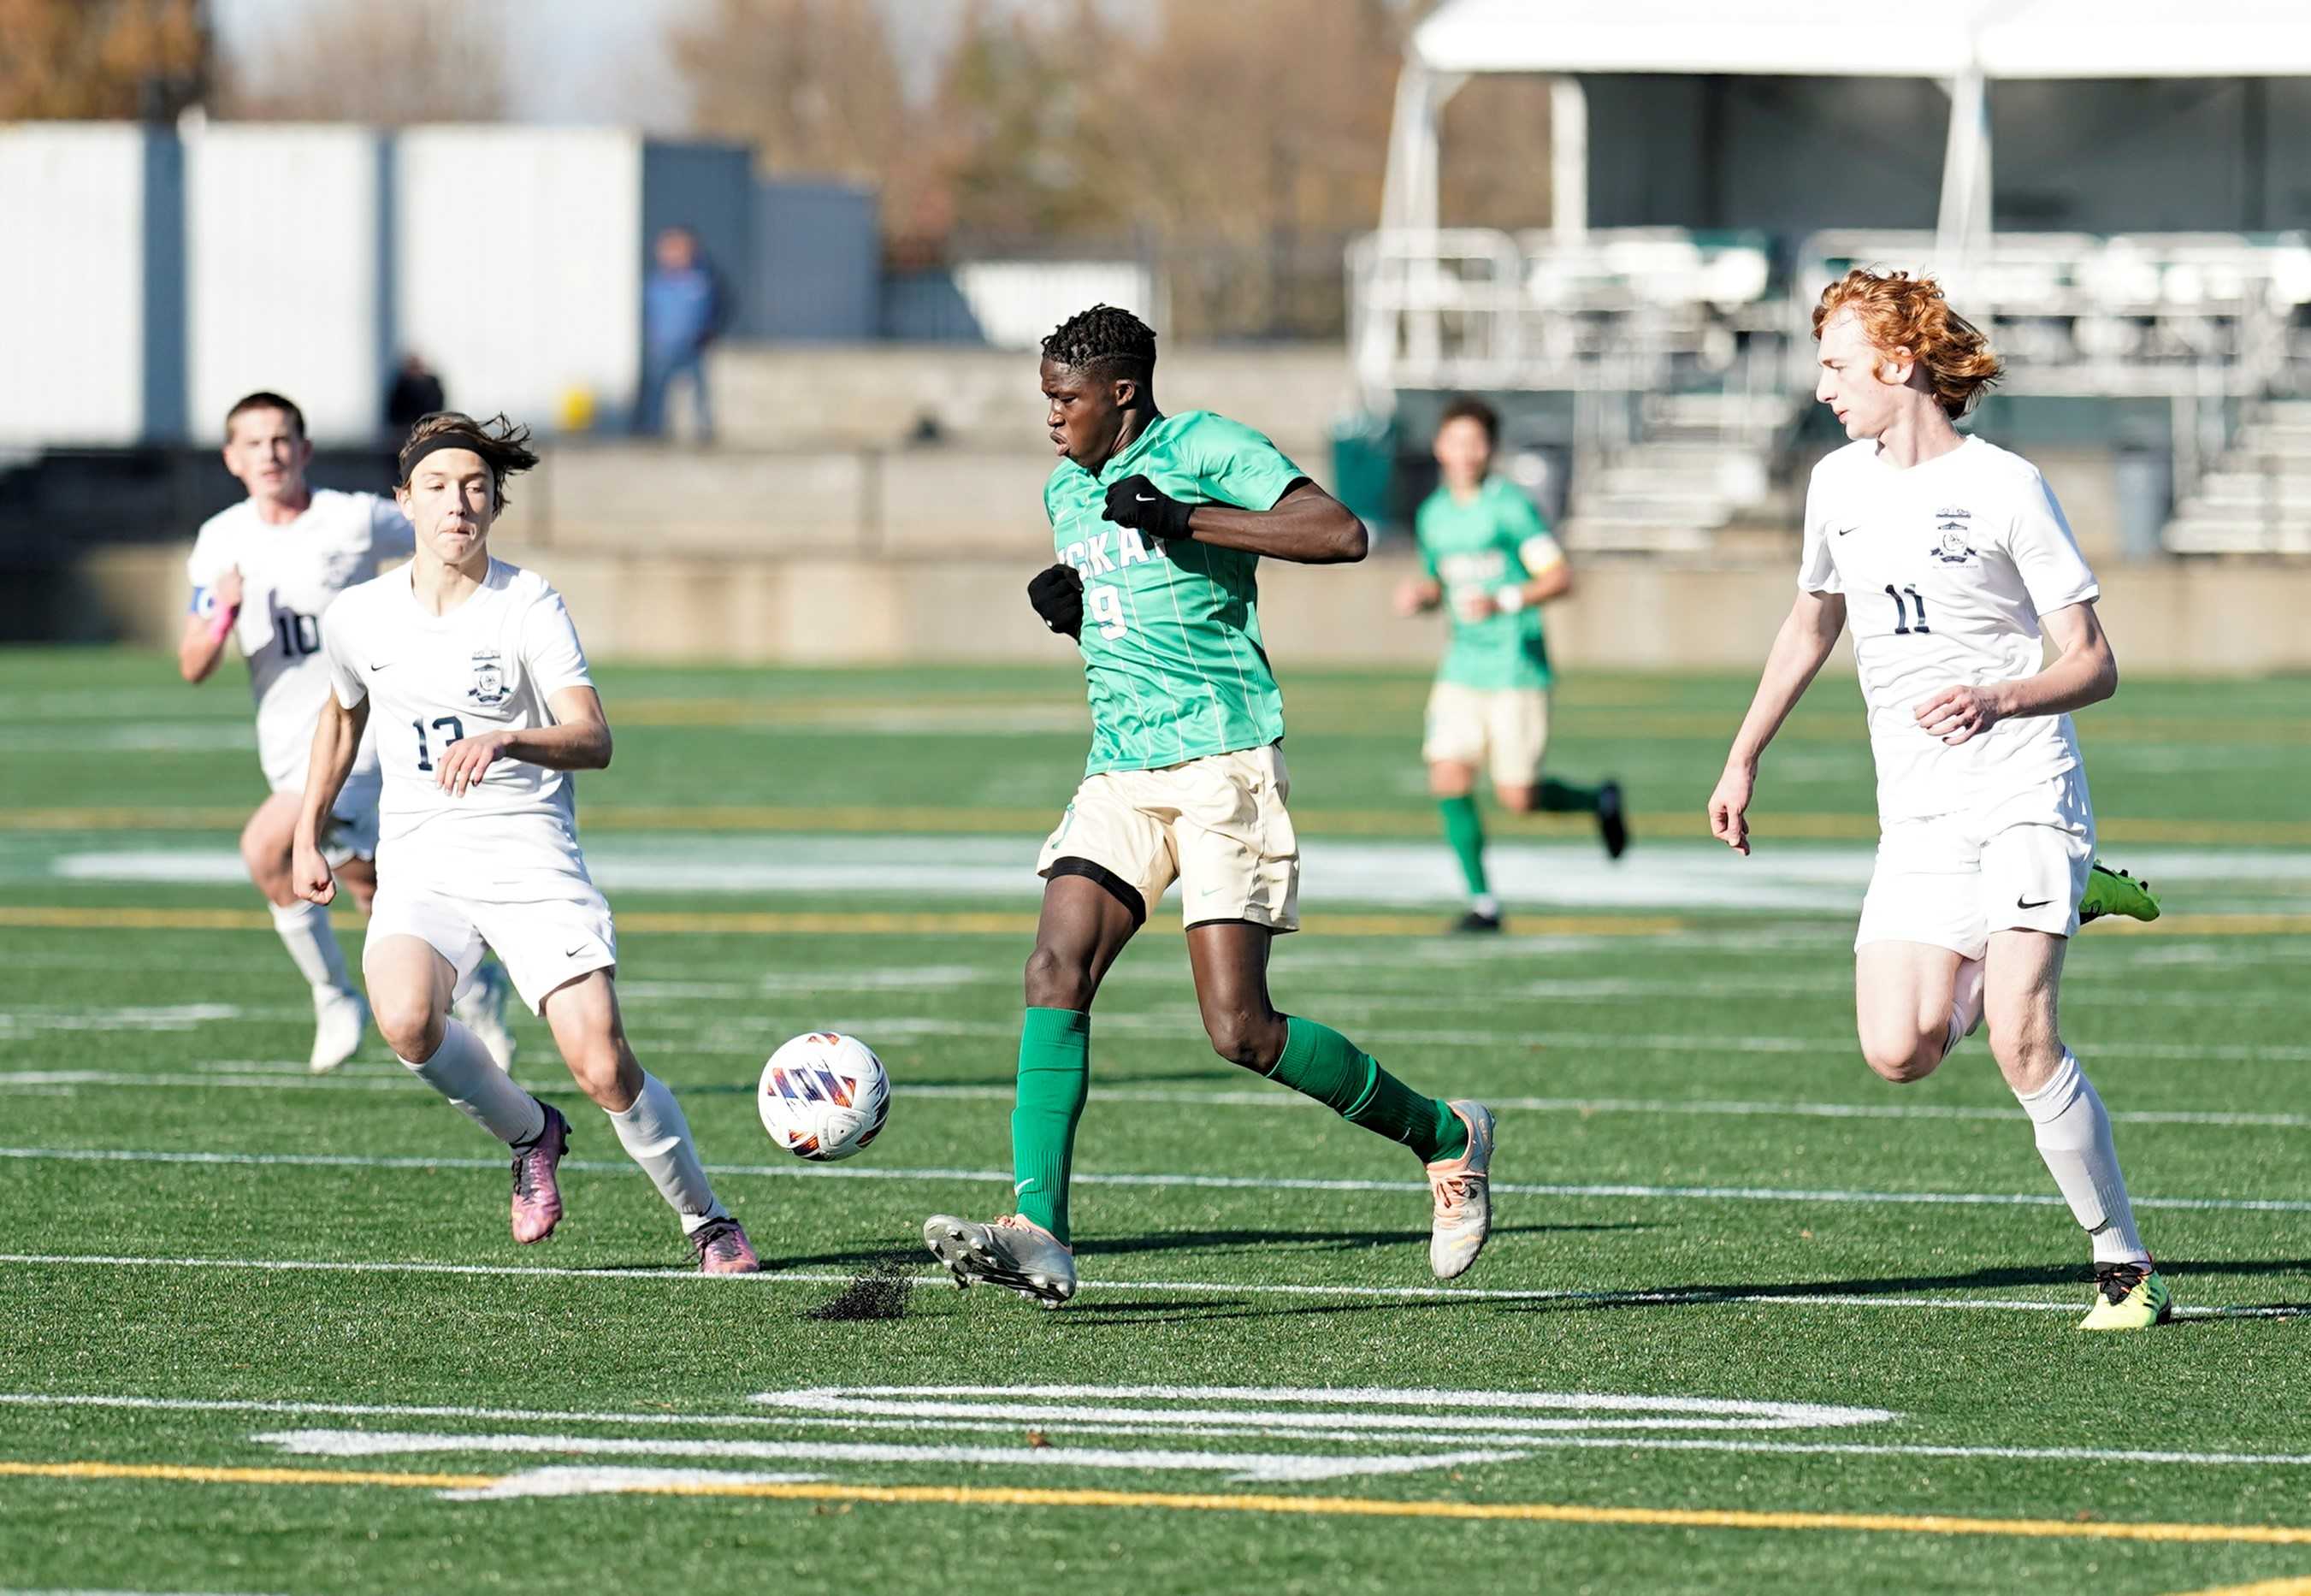 McKay's Abdoulie Jallow (9) had both goals in his team's 2-1 win over West Albany on Saturday. (Photo by Jon Olson)